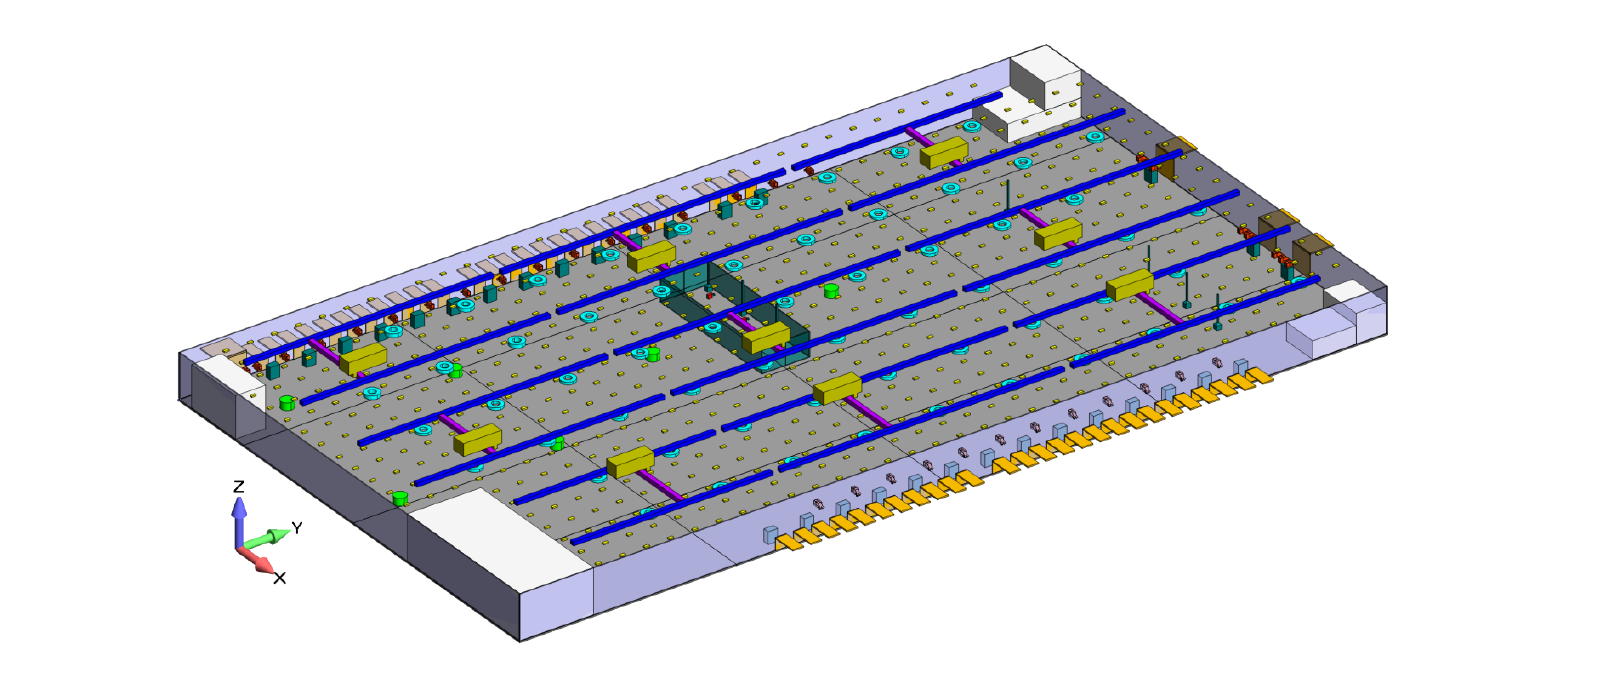 Figure 1: CAD geometry of one section of the building.